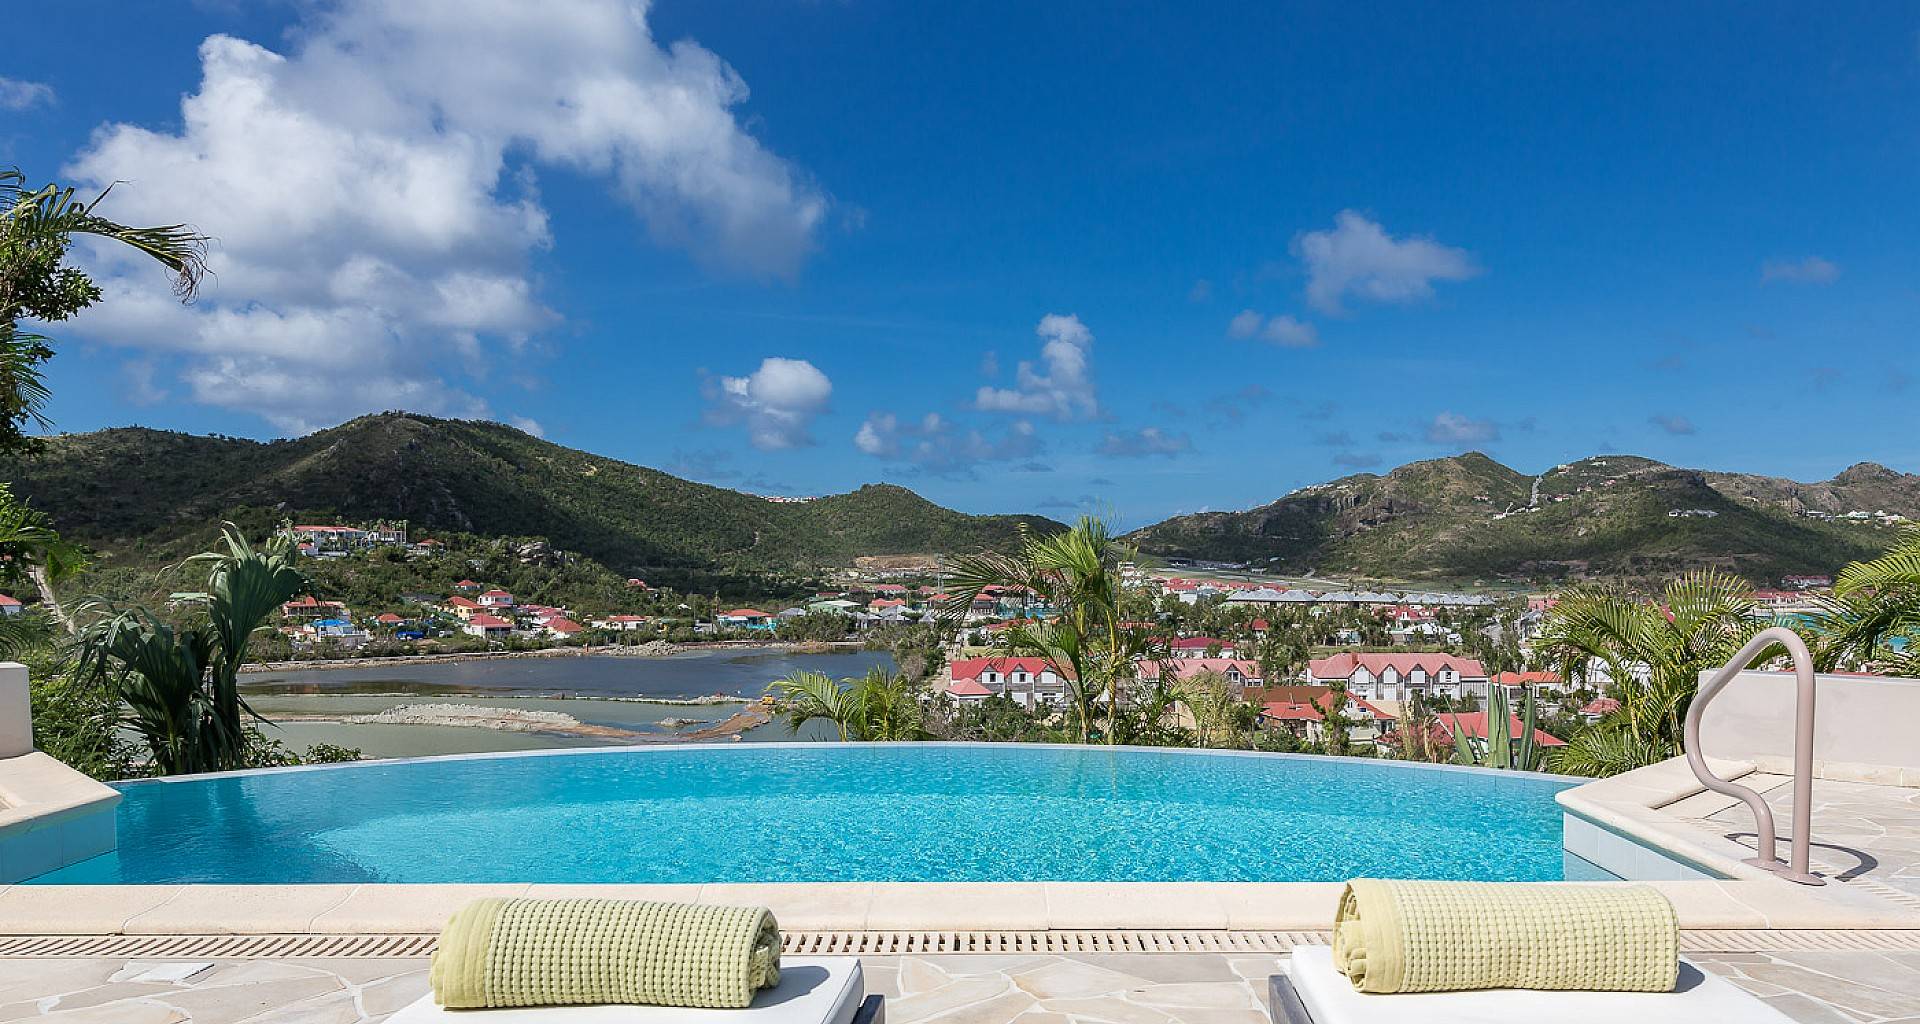 Villa Style and St. Barth Outside